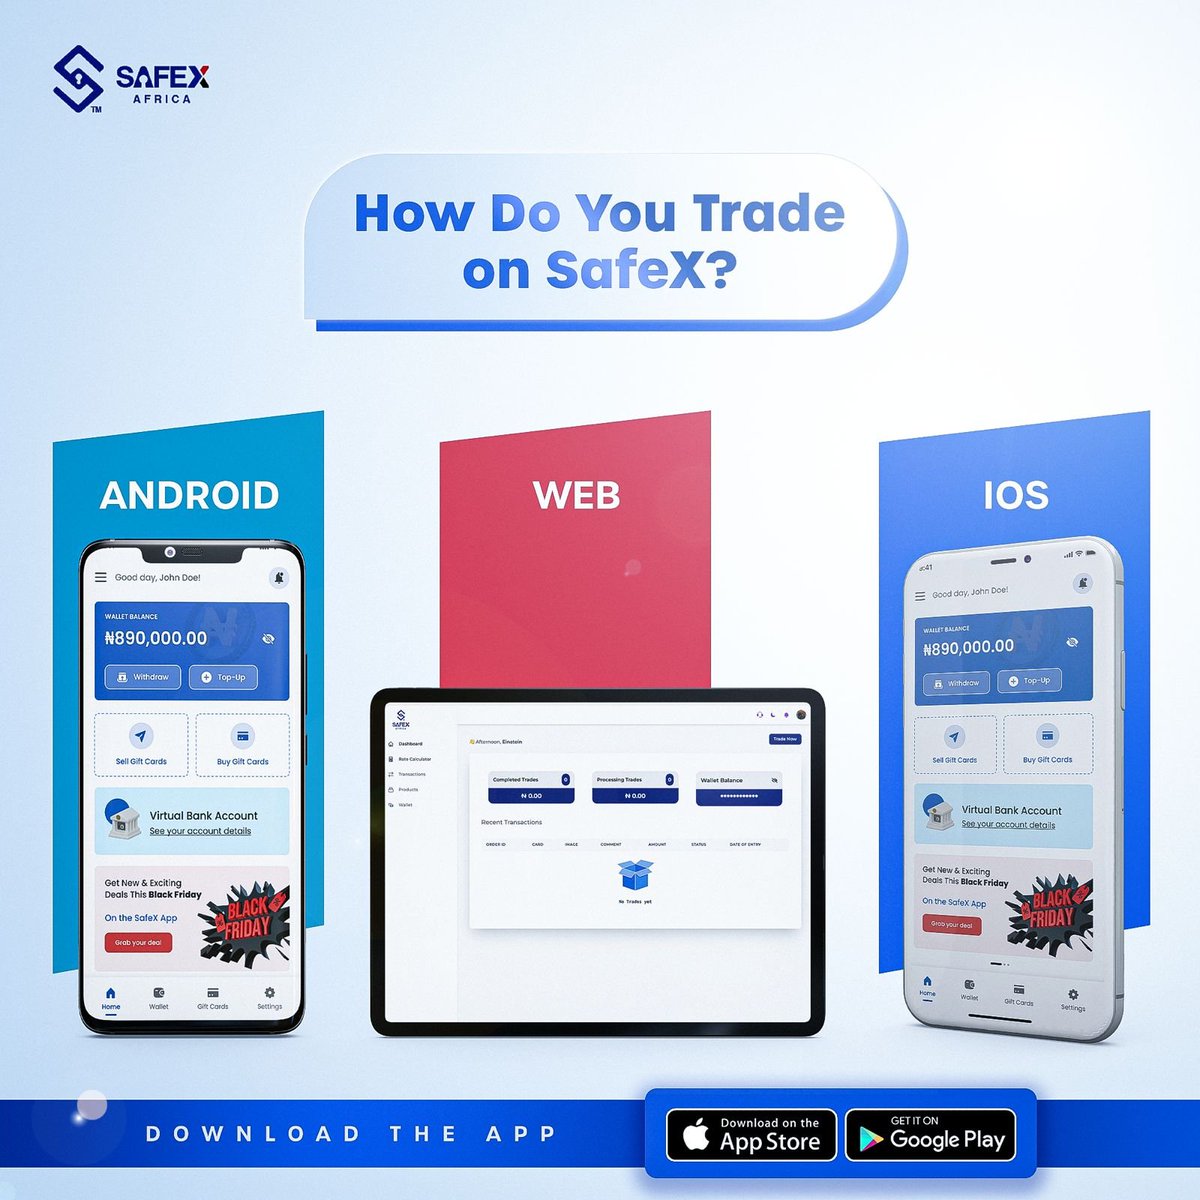 We want to know how users trade on SafeX.
So, tell us, which platform do you use to complete your transactions?

#SafeX #iOS #Android